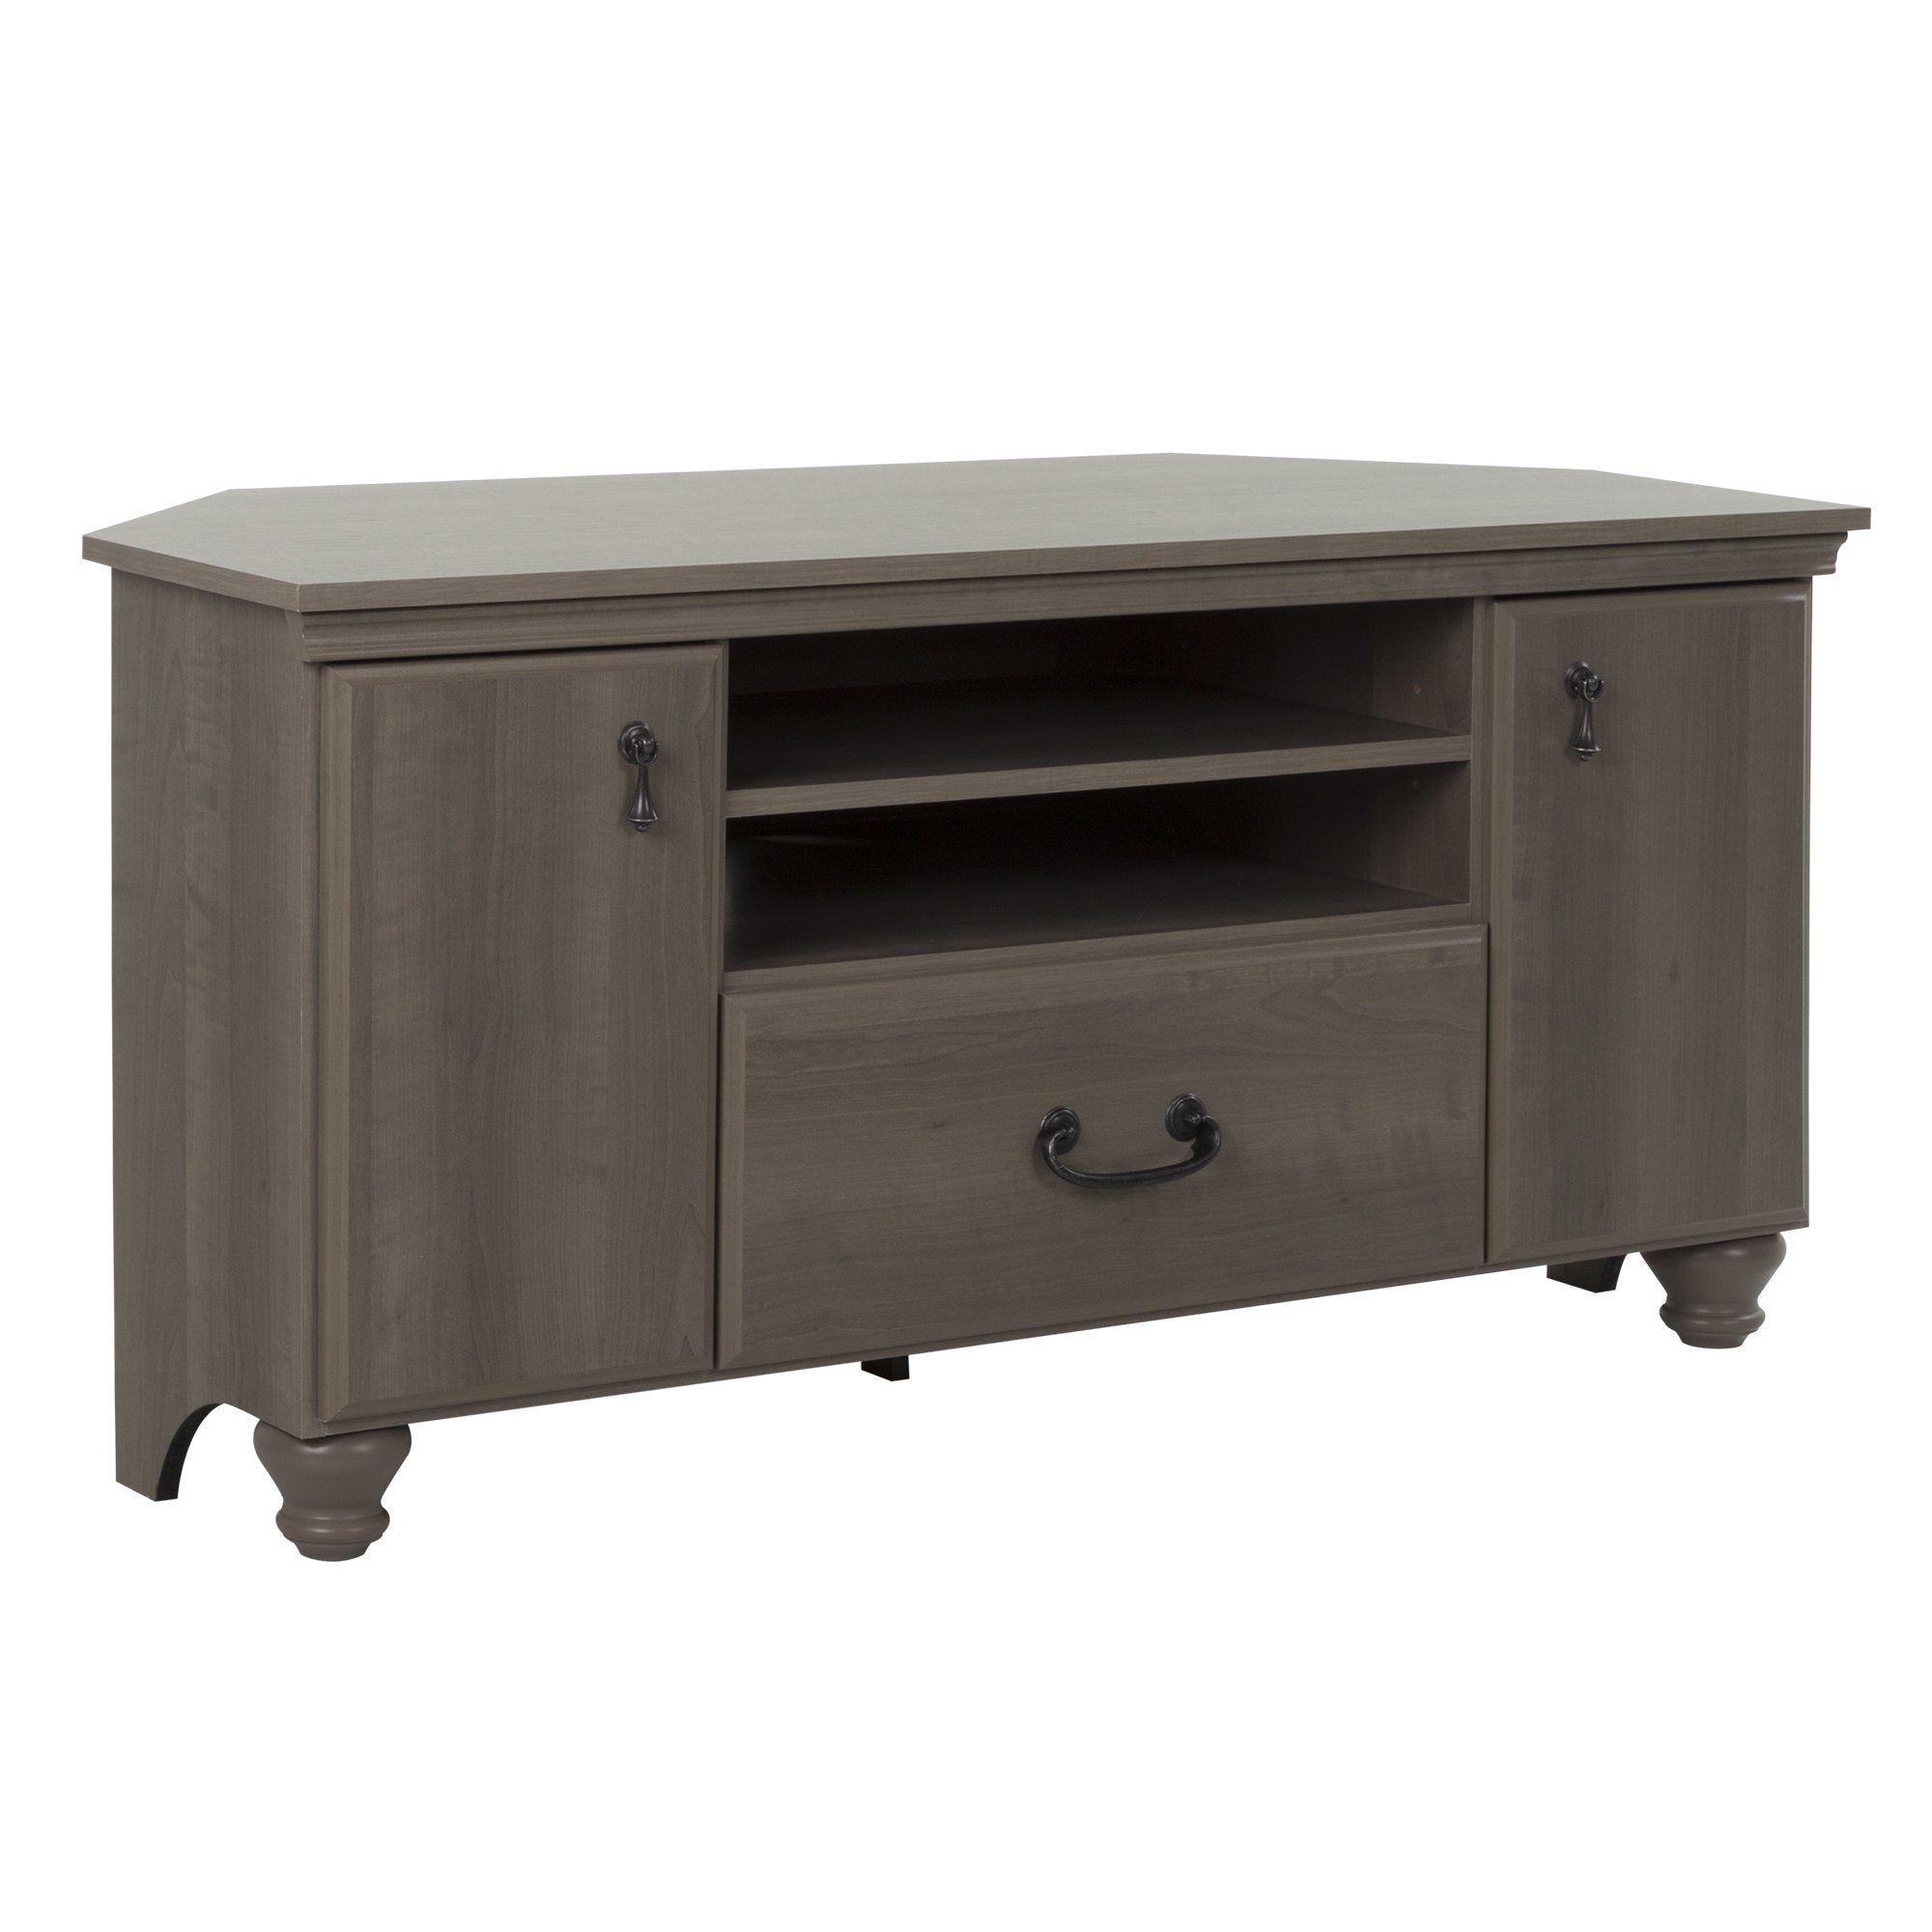 Shop Copper Grove Holopaw Grey Laminate Corner Tv Stand With For Fashionable Grey Corner Tv Stands (View 3 of 20)